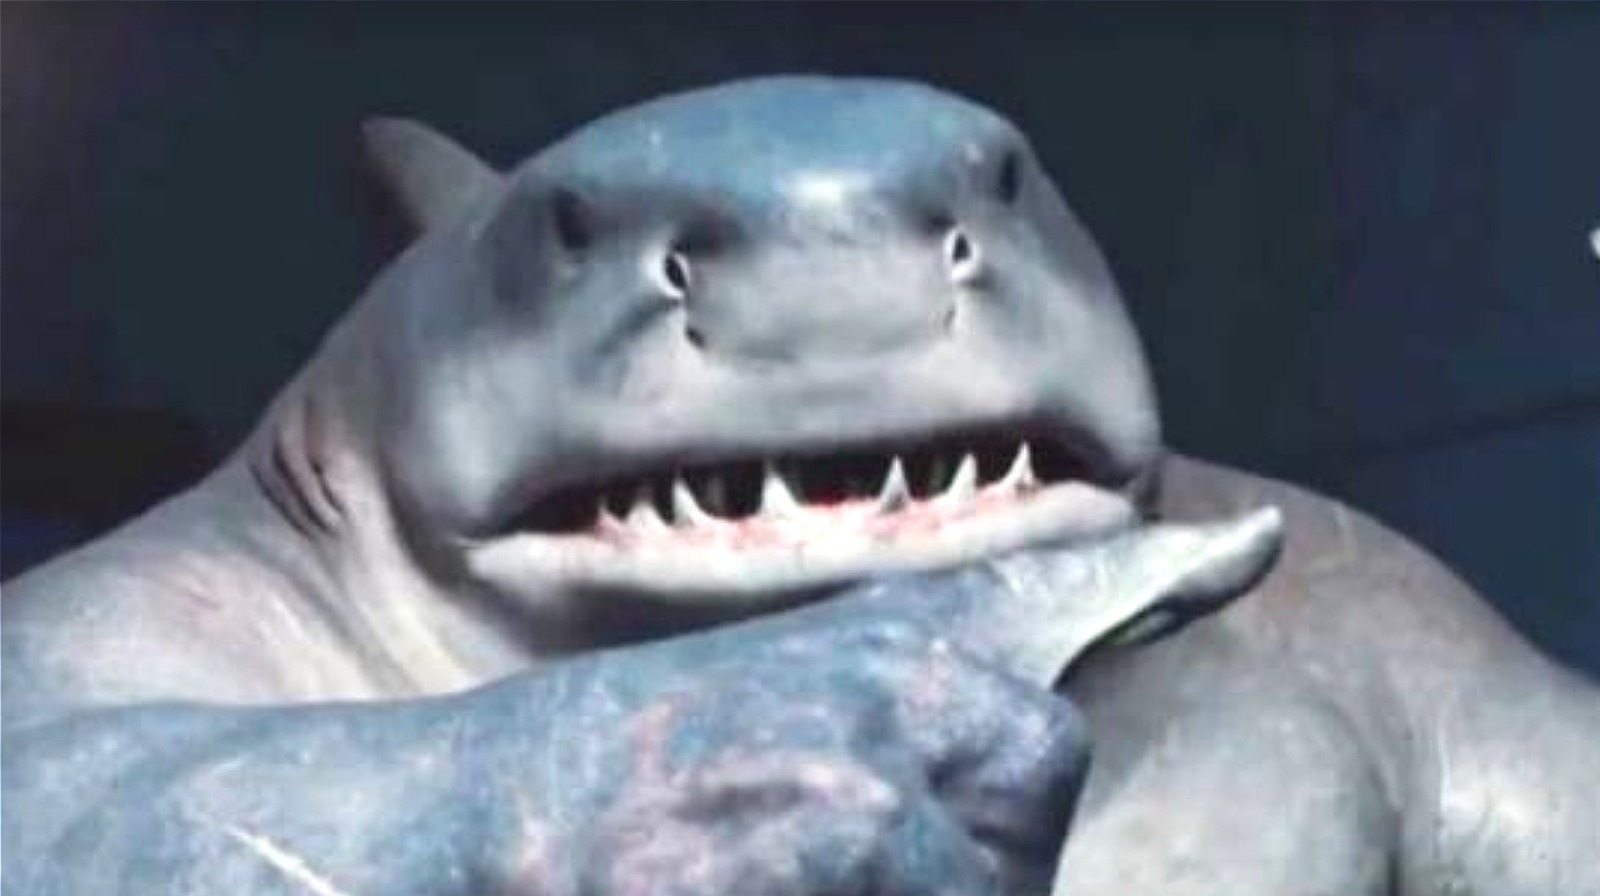 What Were The Sea Creatures That Attacked King Shark In The Suicide Squad?